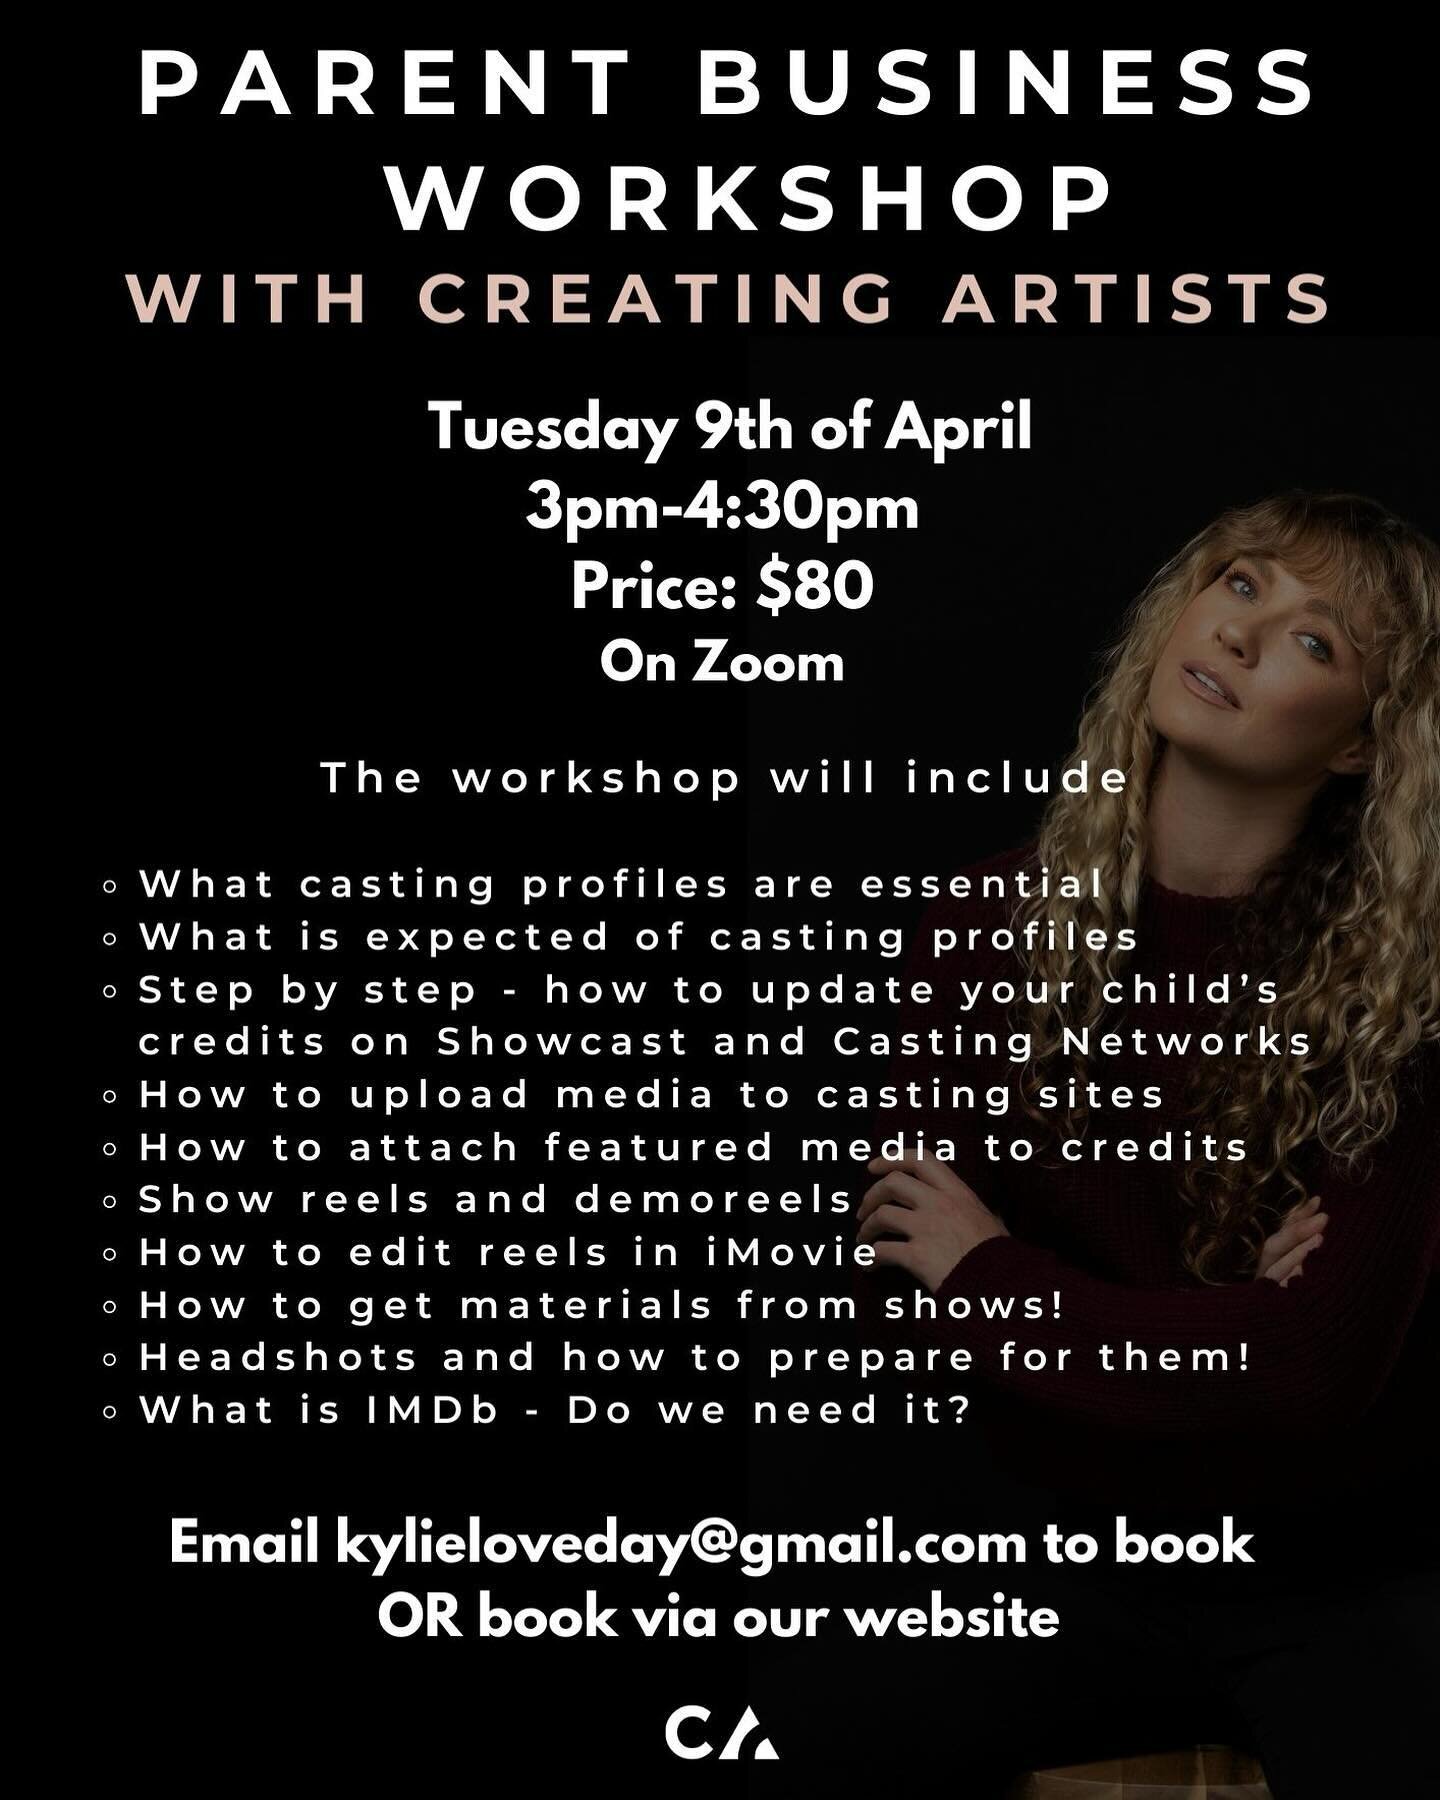 ESSENTIAL PARENT BUSINESS WORKSHOP💥🎬 TOMORROW 3pm-4:30pm on ZOOM 🖥️ 

We often hear parents saying they feel a little lost about the business side of acting!! So&hellip; we are running a workshop covering:

▪️Profiles 
▪️Updating profiles 
▪️Showr